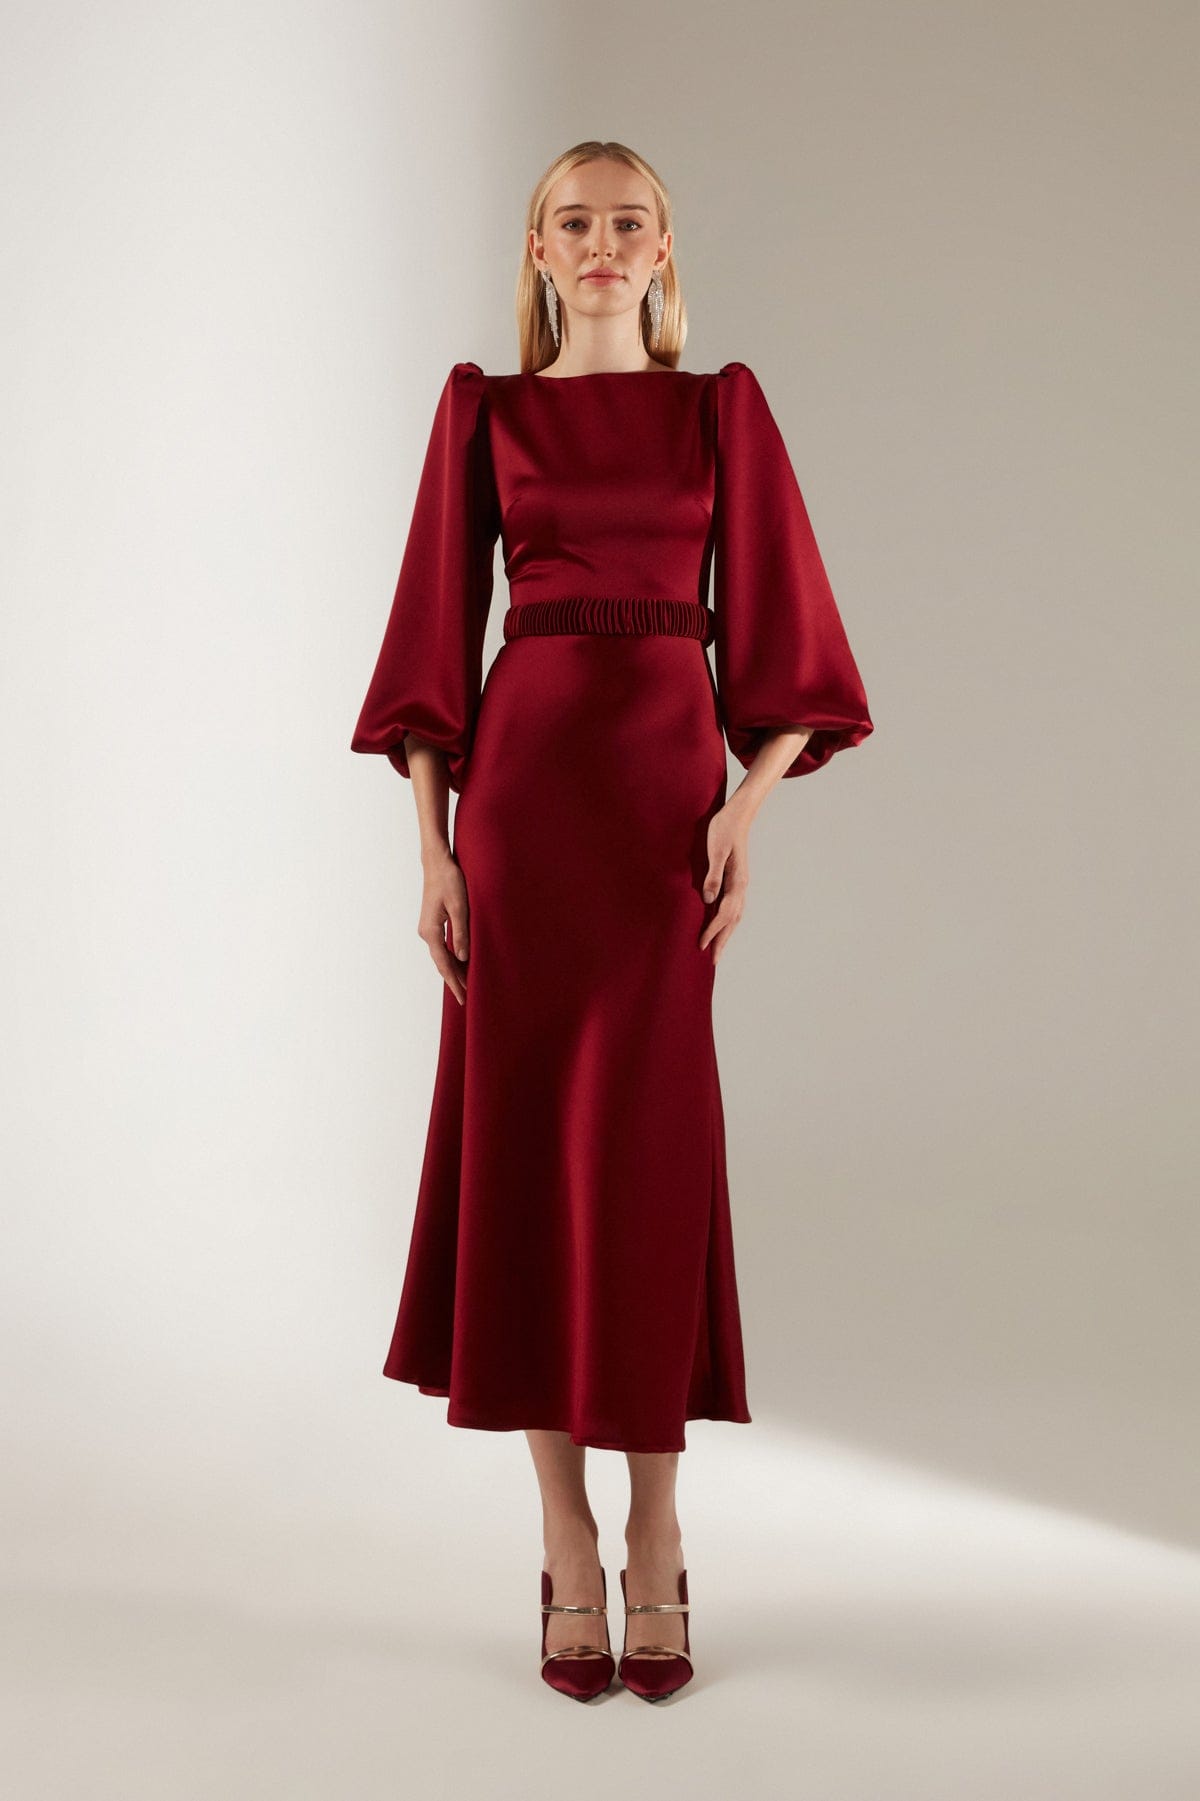 Dark Red Engagement Dress with Long Balloon Sleeves